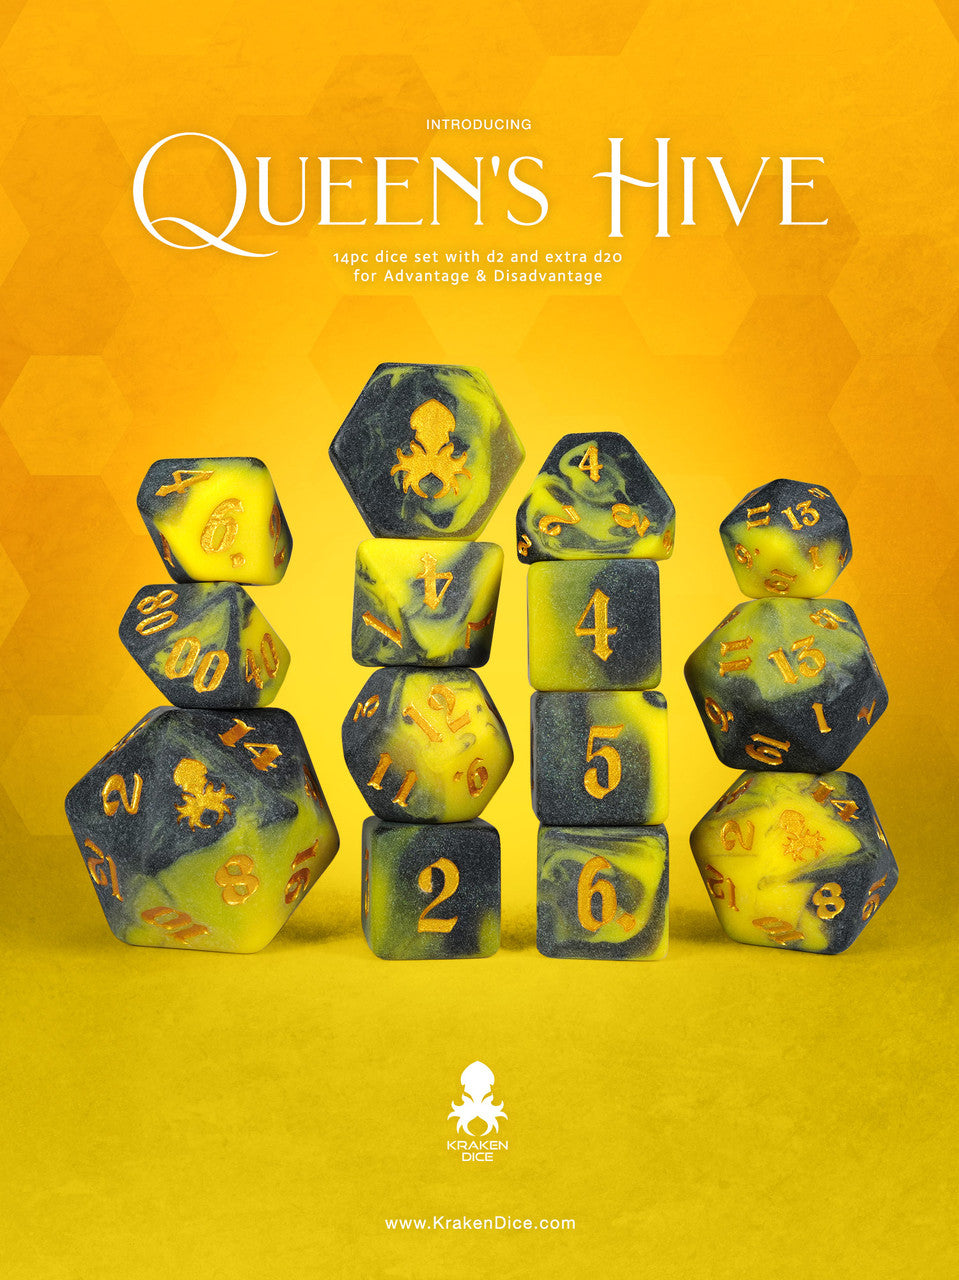 Queen’s Hive 14pc Dice Set inked in Gold